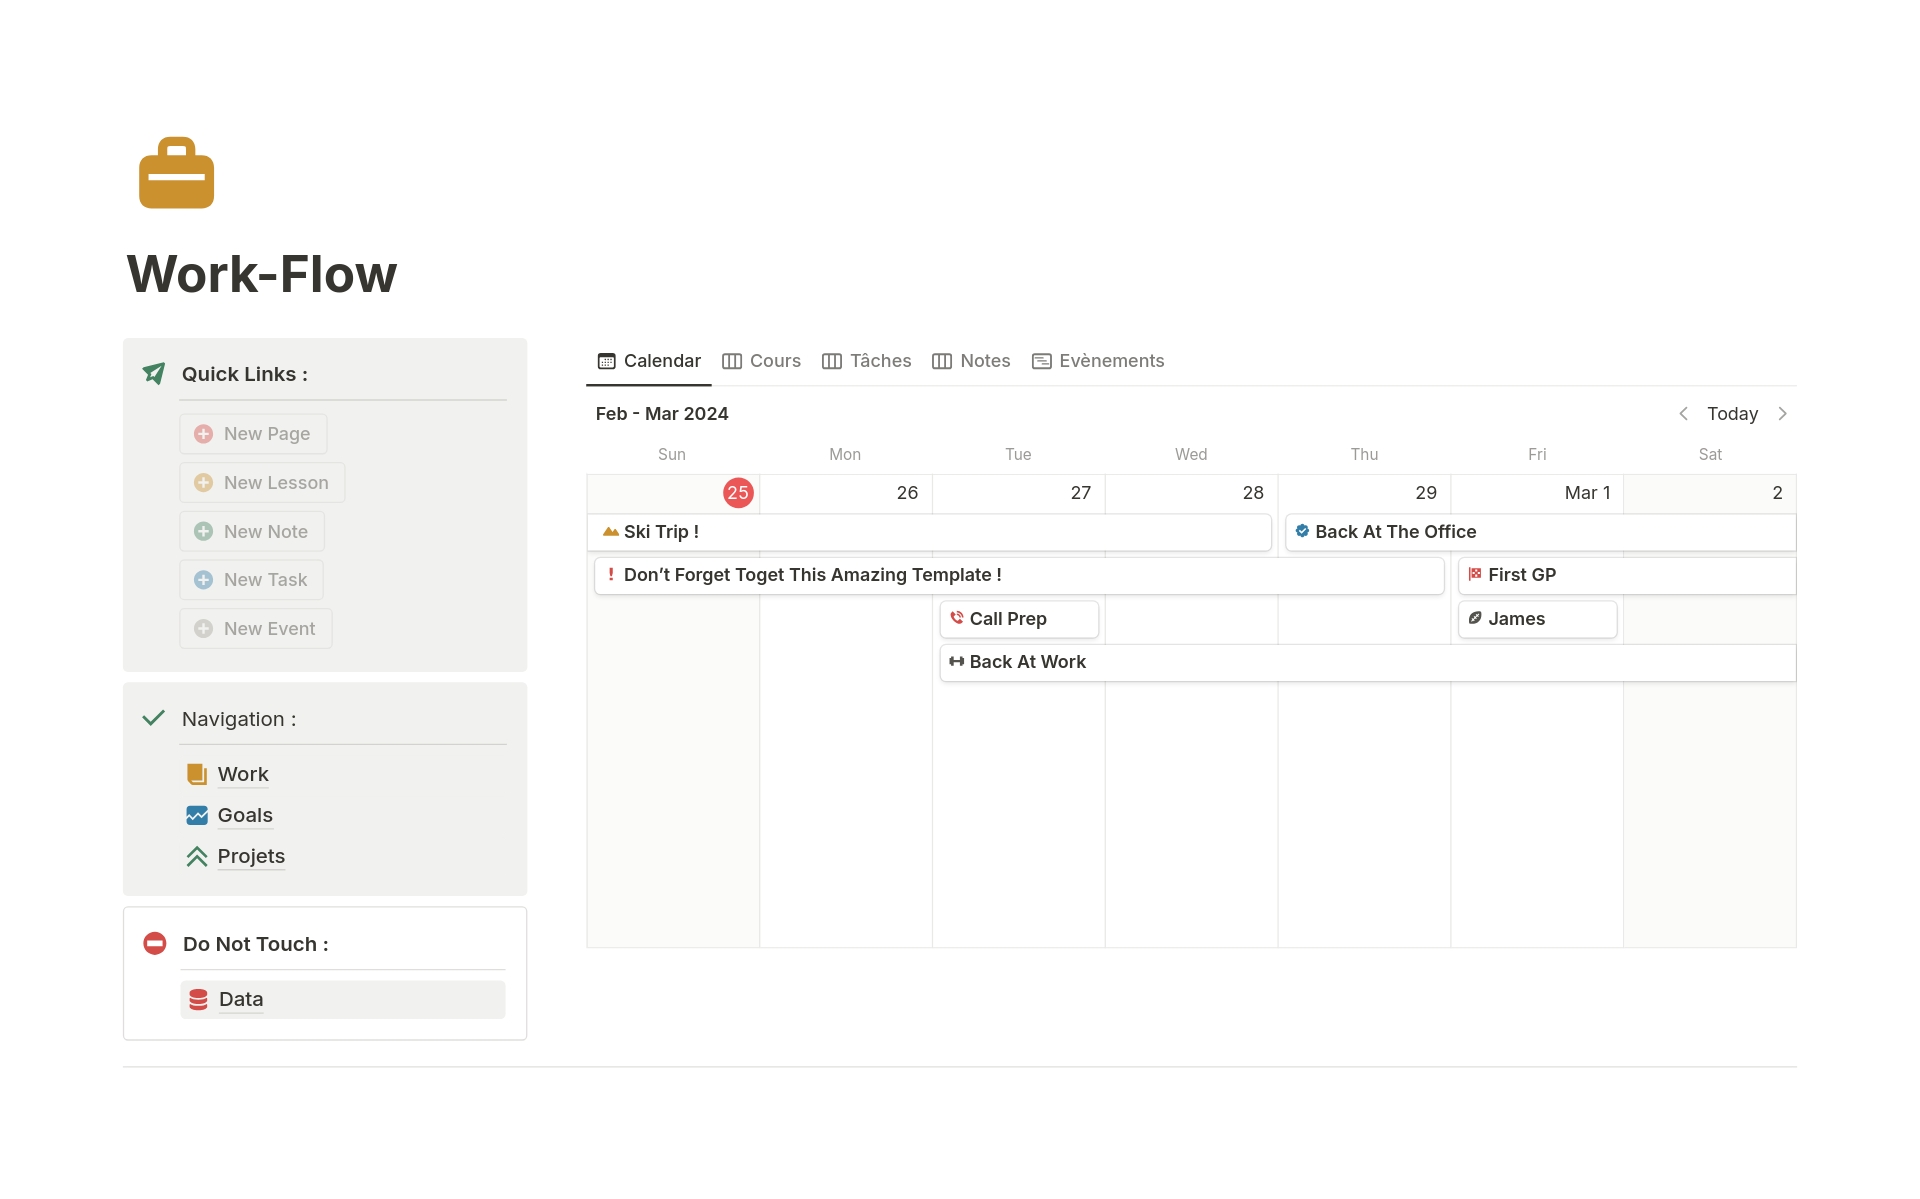 Welcome to work-Flow, the ultimate solution for productivity and organization. This innovative Notion page is designed to be the foundational tool that integrates seamlessly into any work or personal environ environment, providing unparalleled clarity, speed, and ease of use.